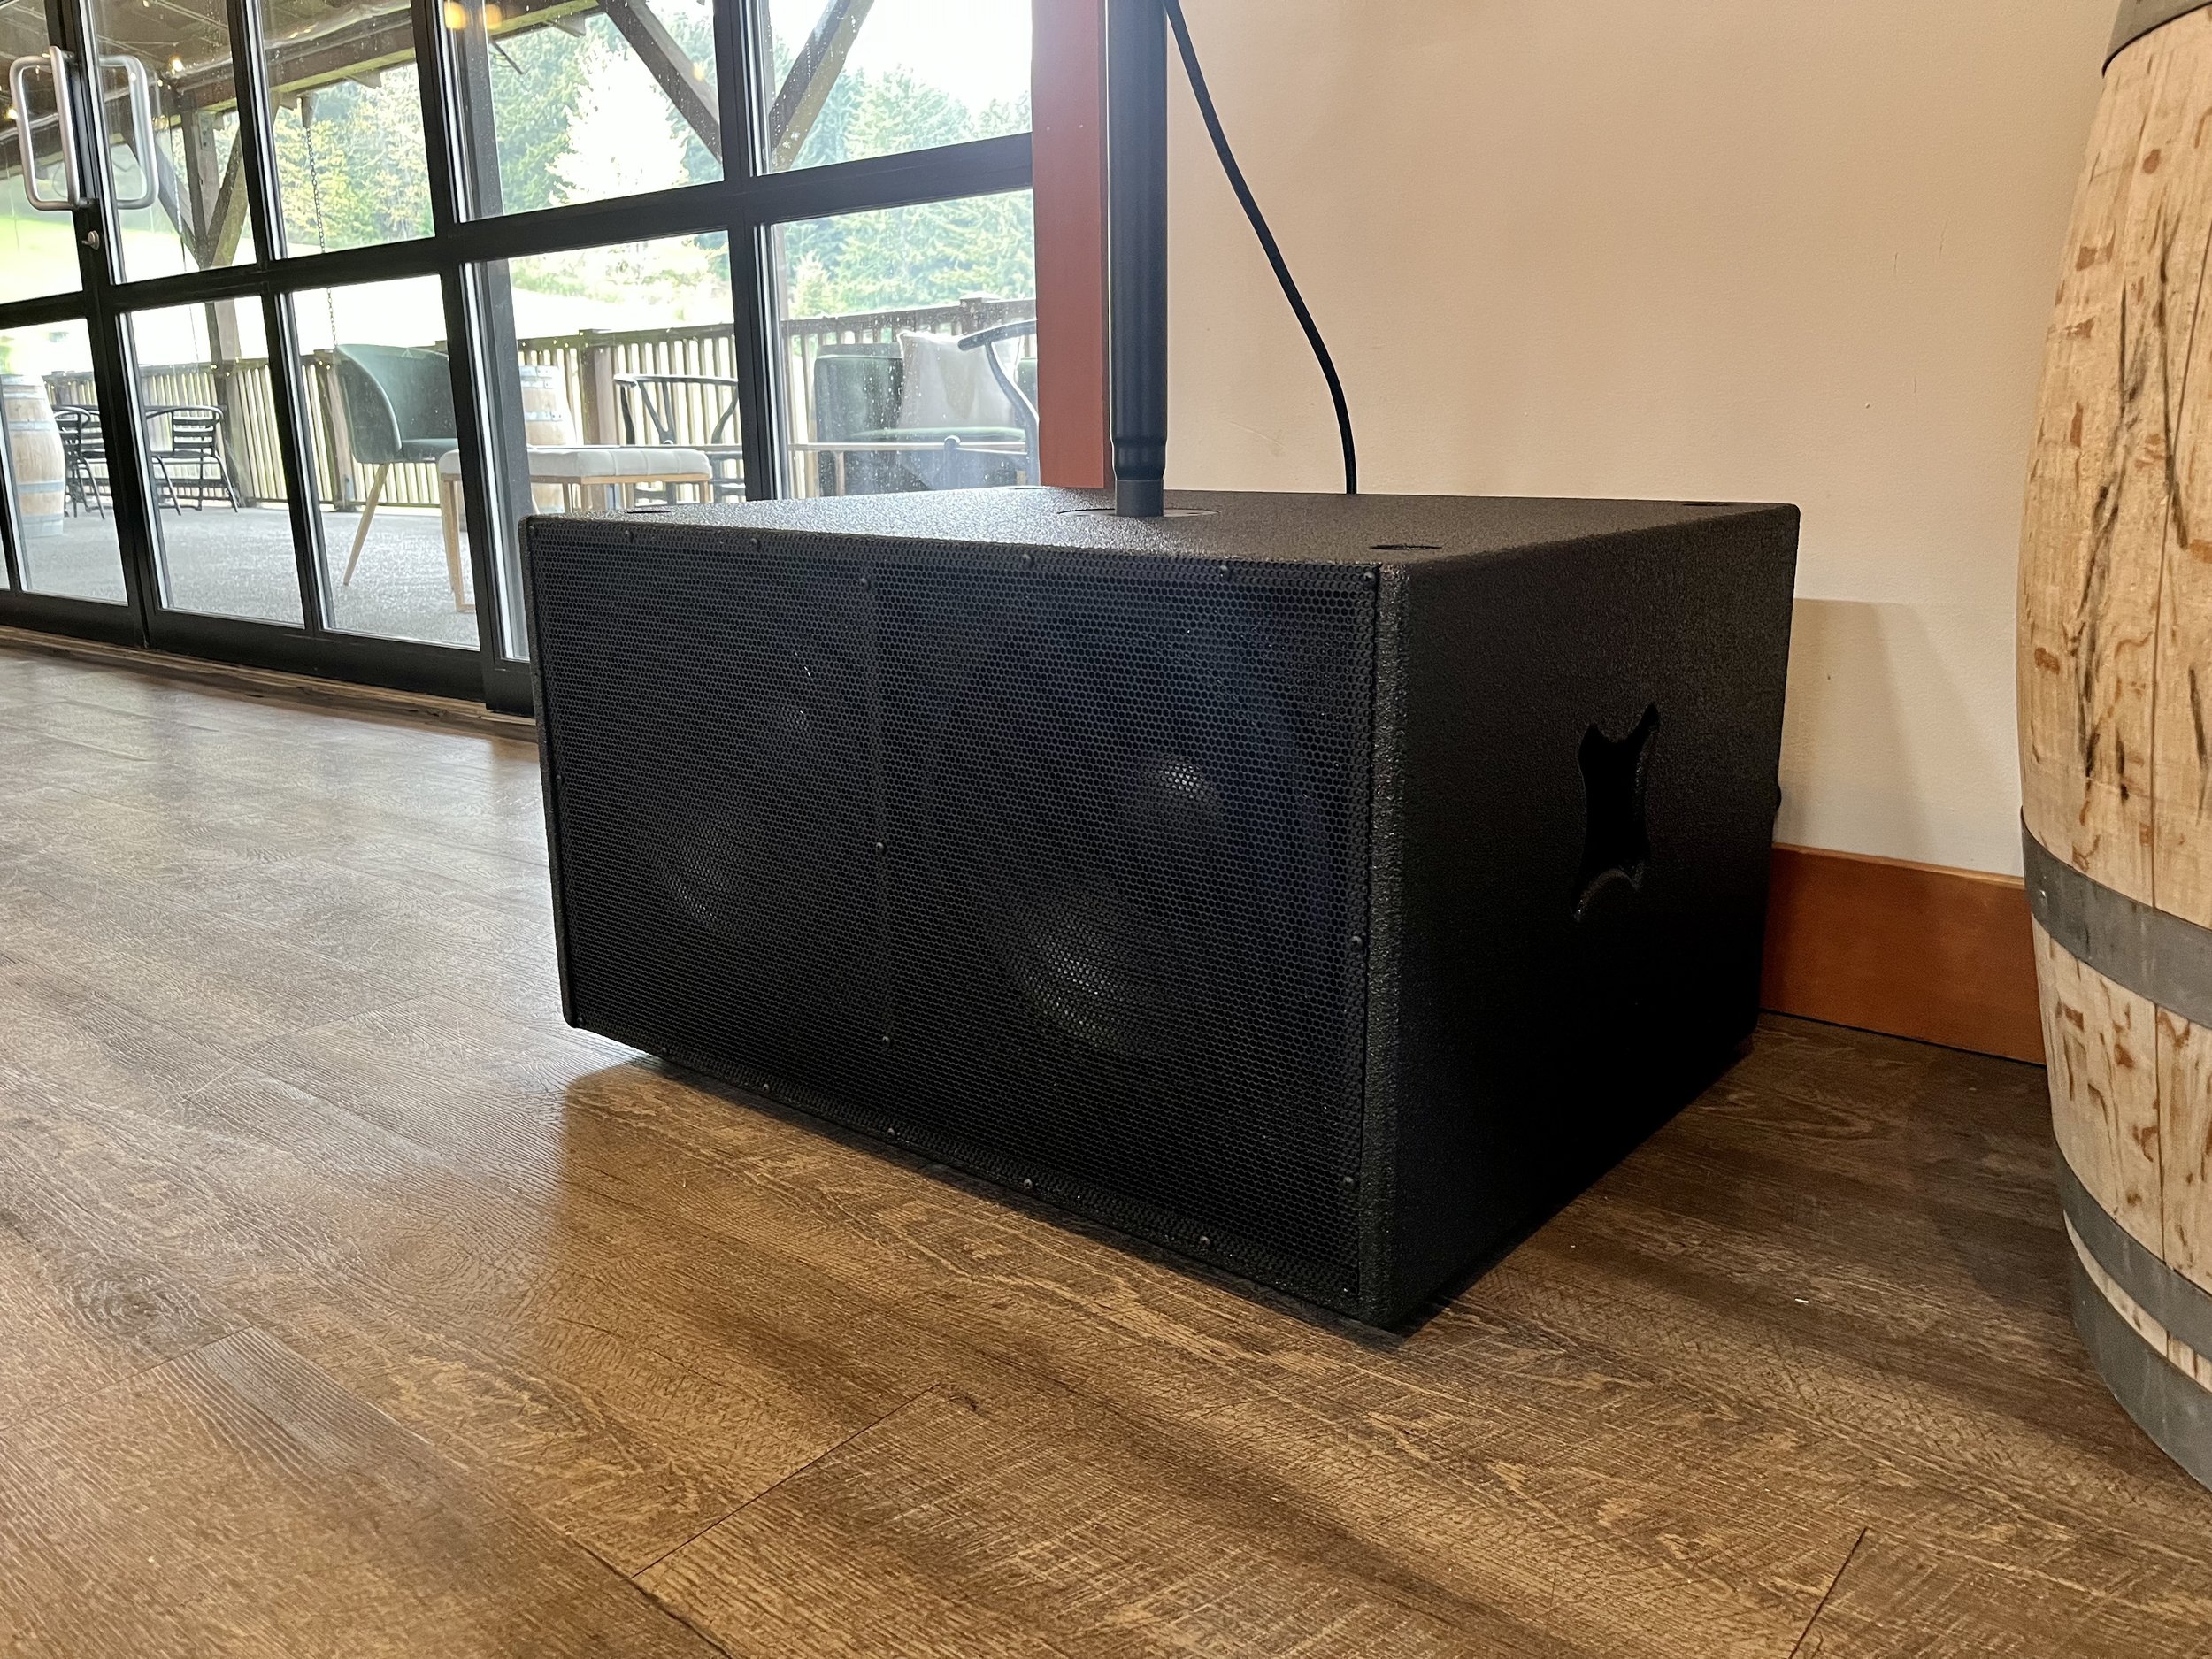 JTR Captivator 212 Pro Subwoofer, ready to rock the dance floor at Church & State Winery, 2022